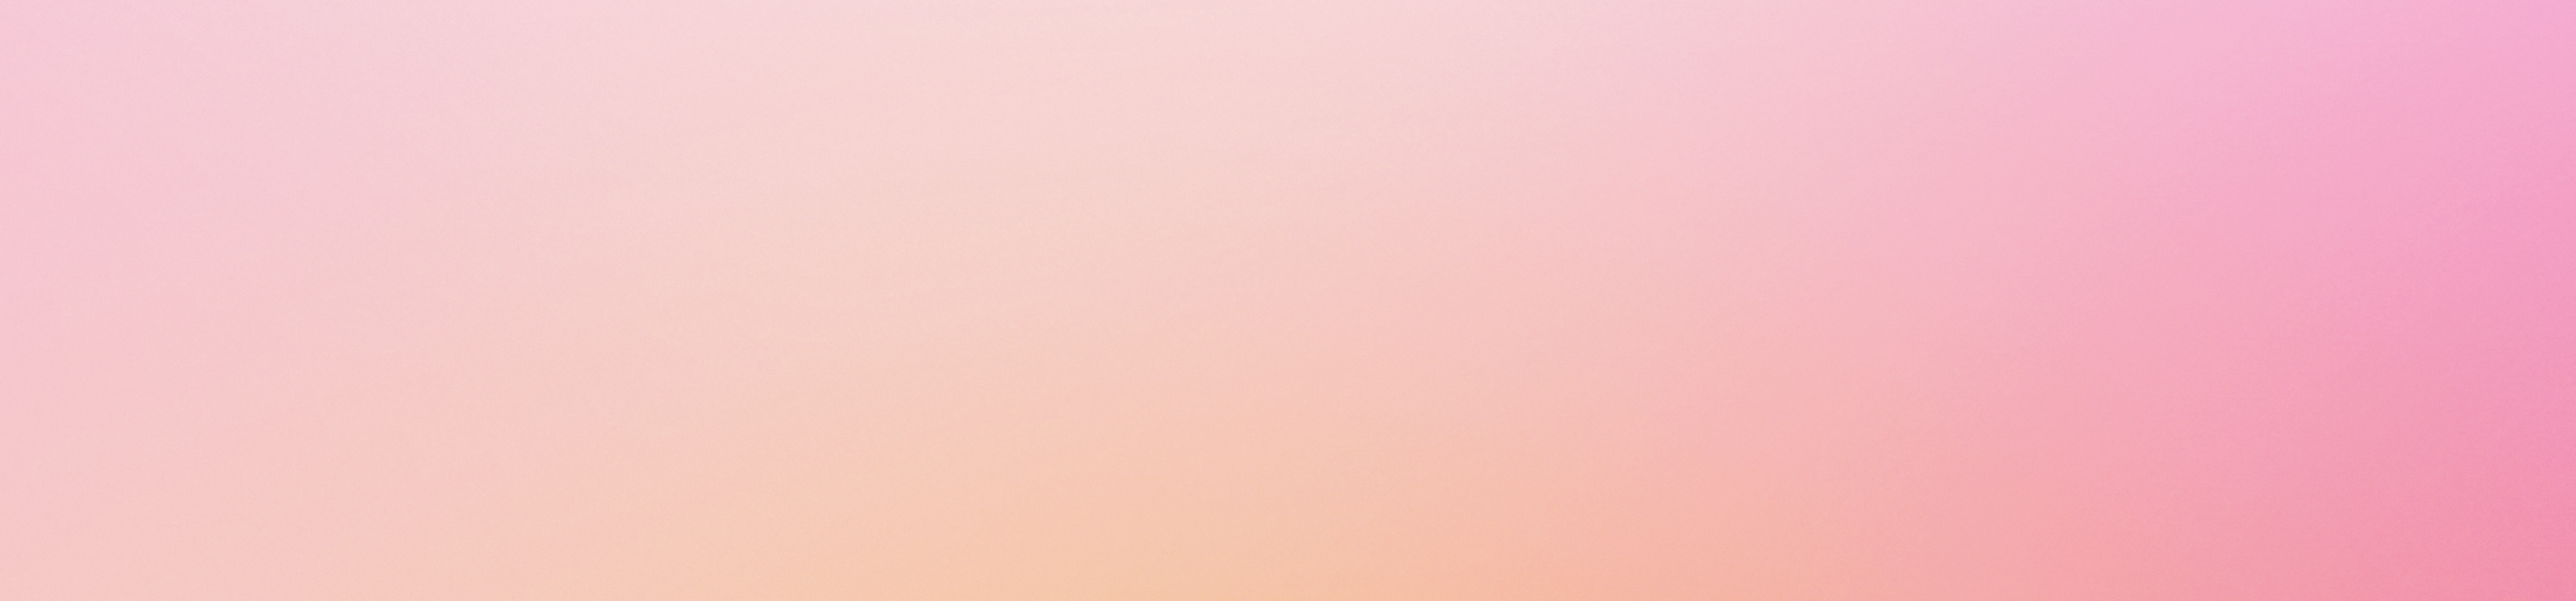 A pink and light yellow gradient transparent banner.